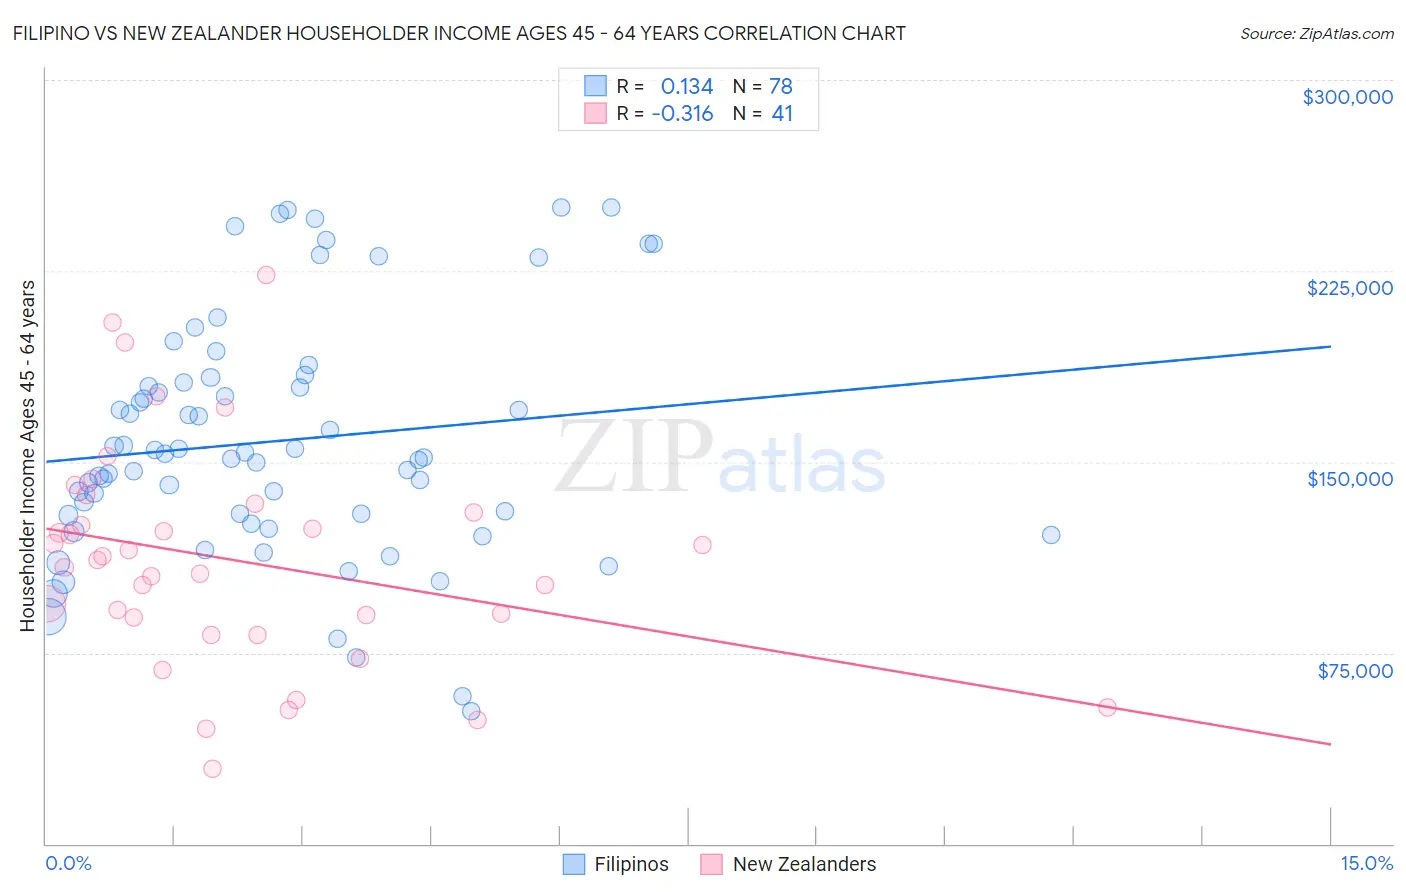 Filipino vs New Zealander Householder Income Ages 45 - 64 years